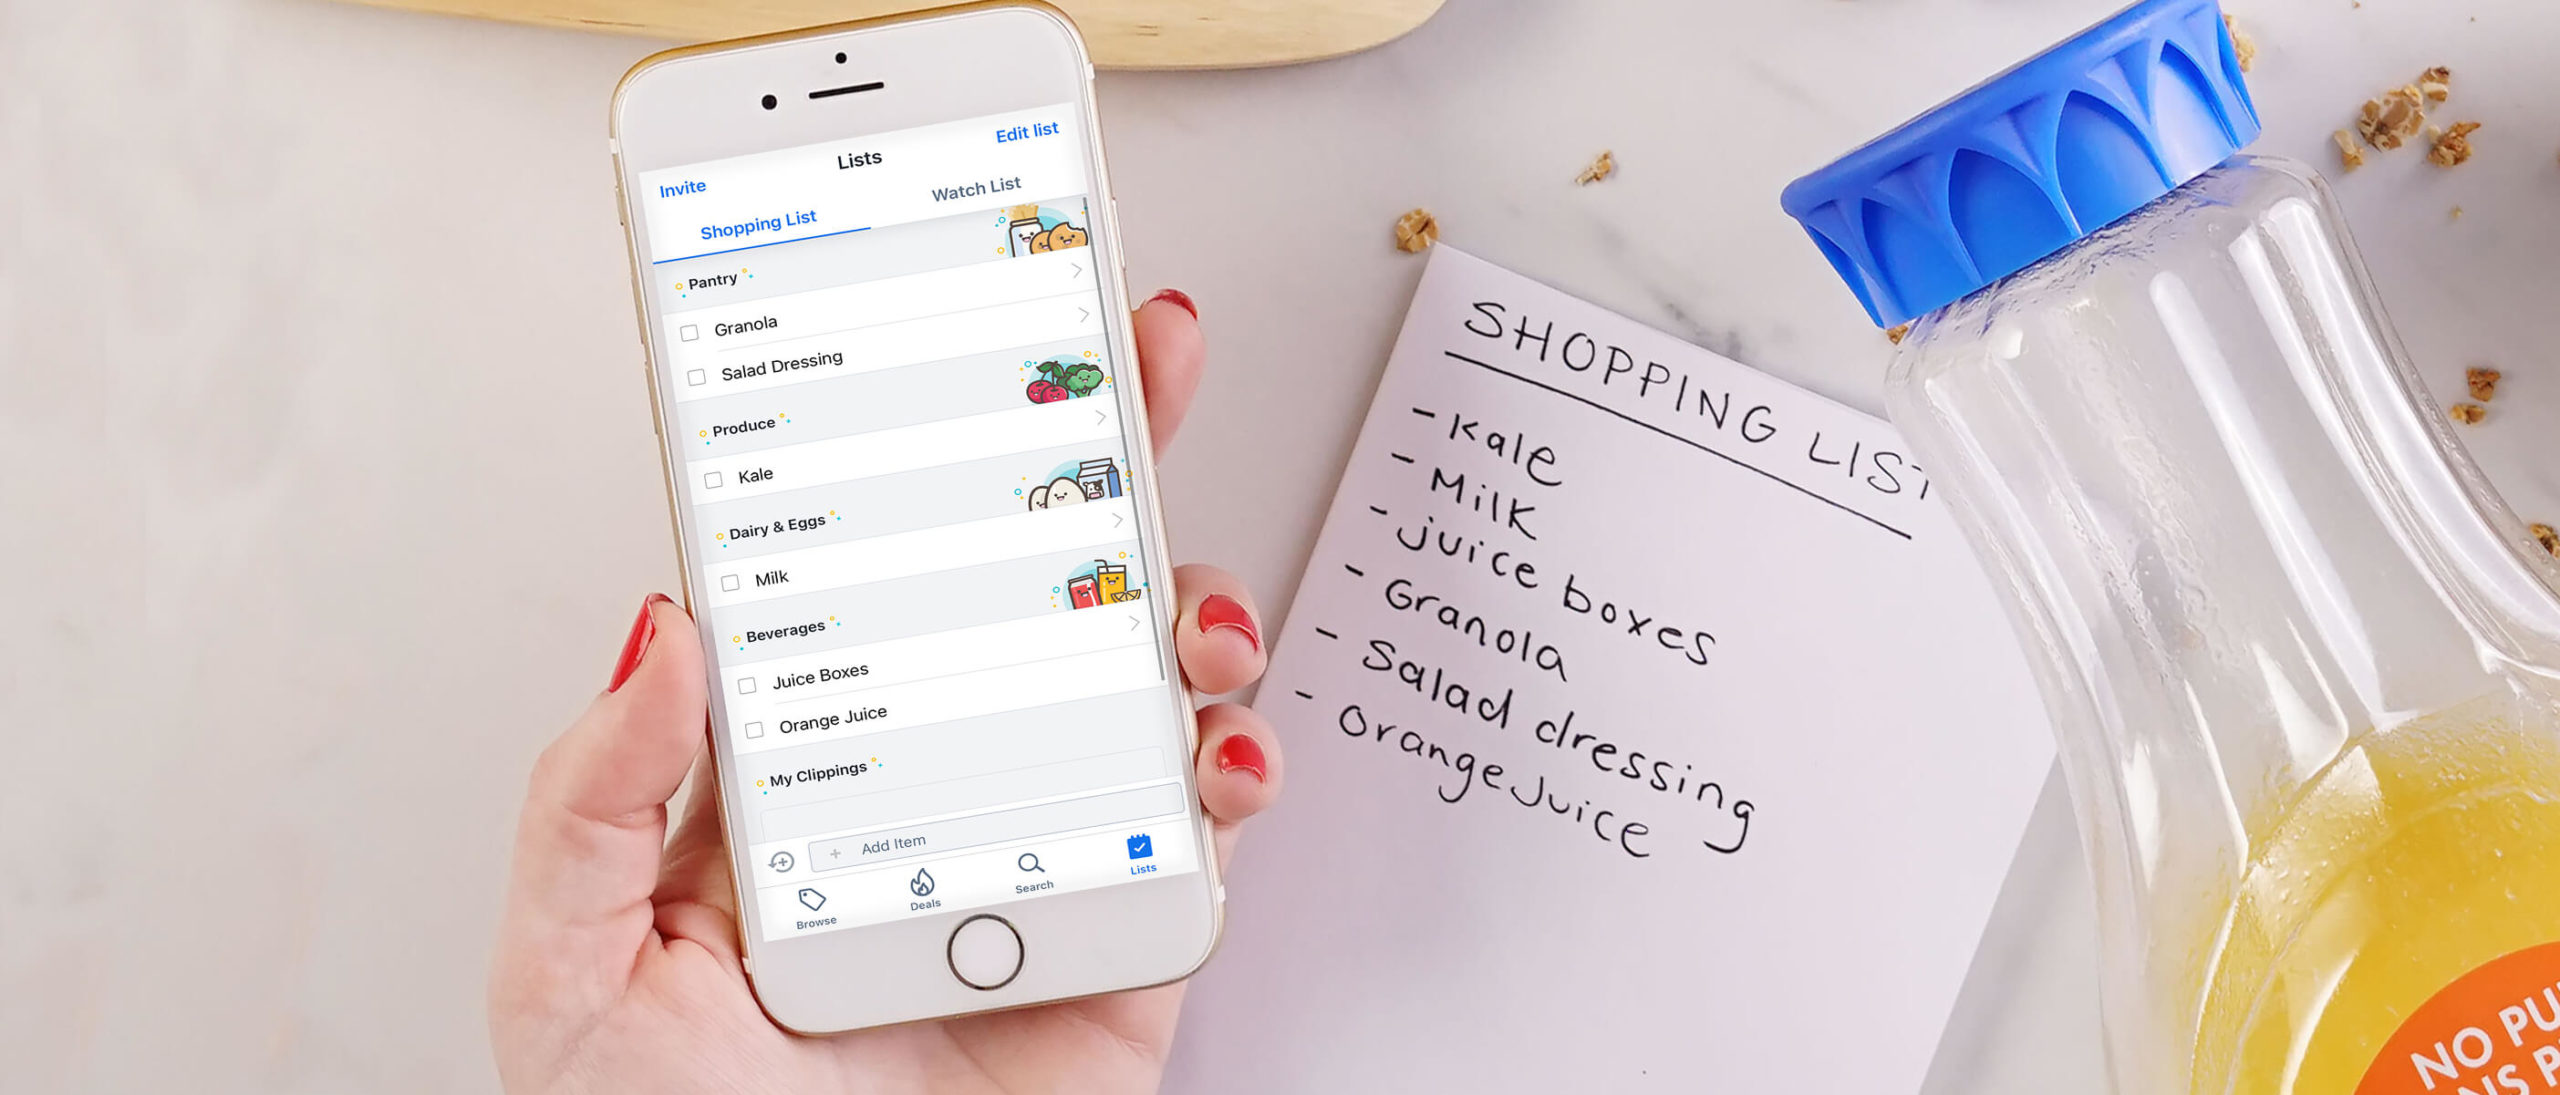 Hand holding a phone open to the Flipp app showing the shopping list feature.